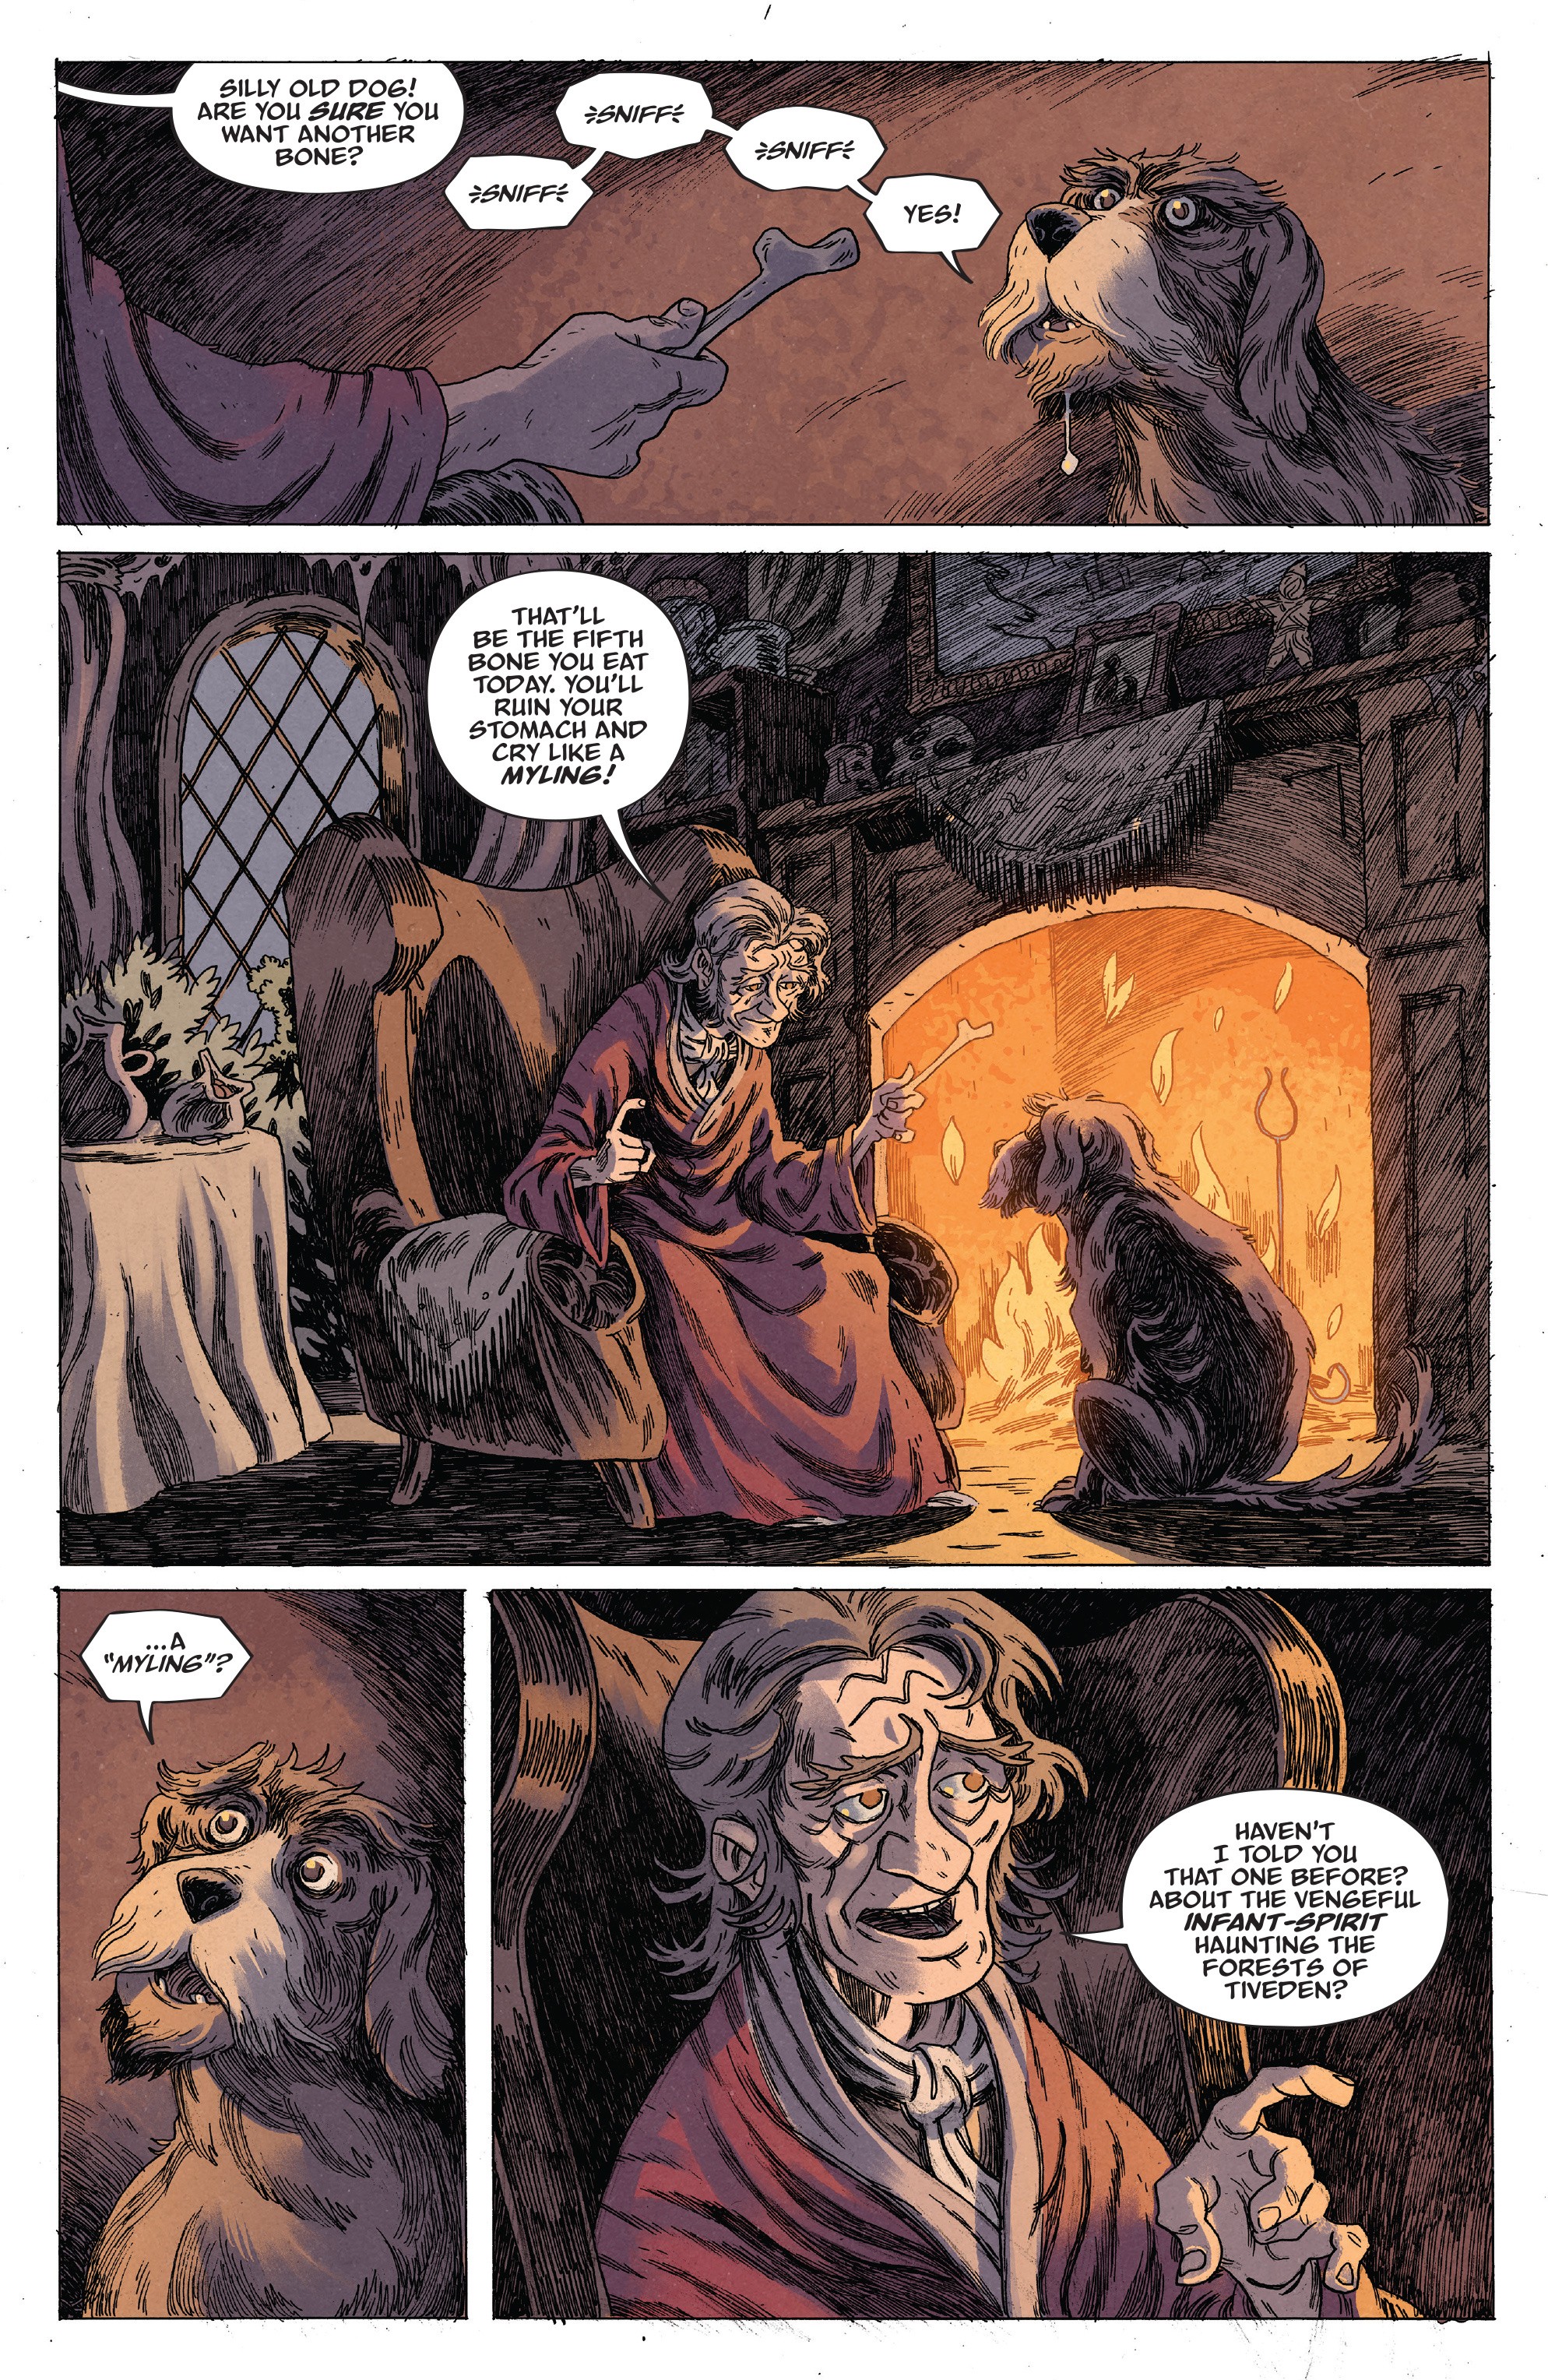 Jim Henson's The Storyteller: Ghosts (2020-): Chapter 1 - Page 3